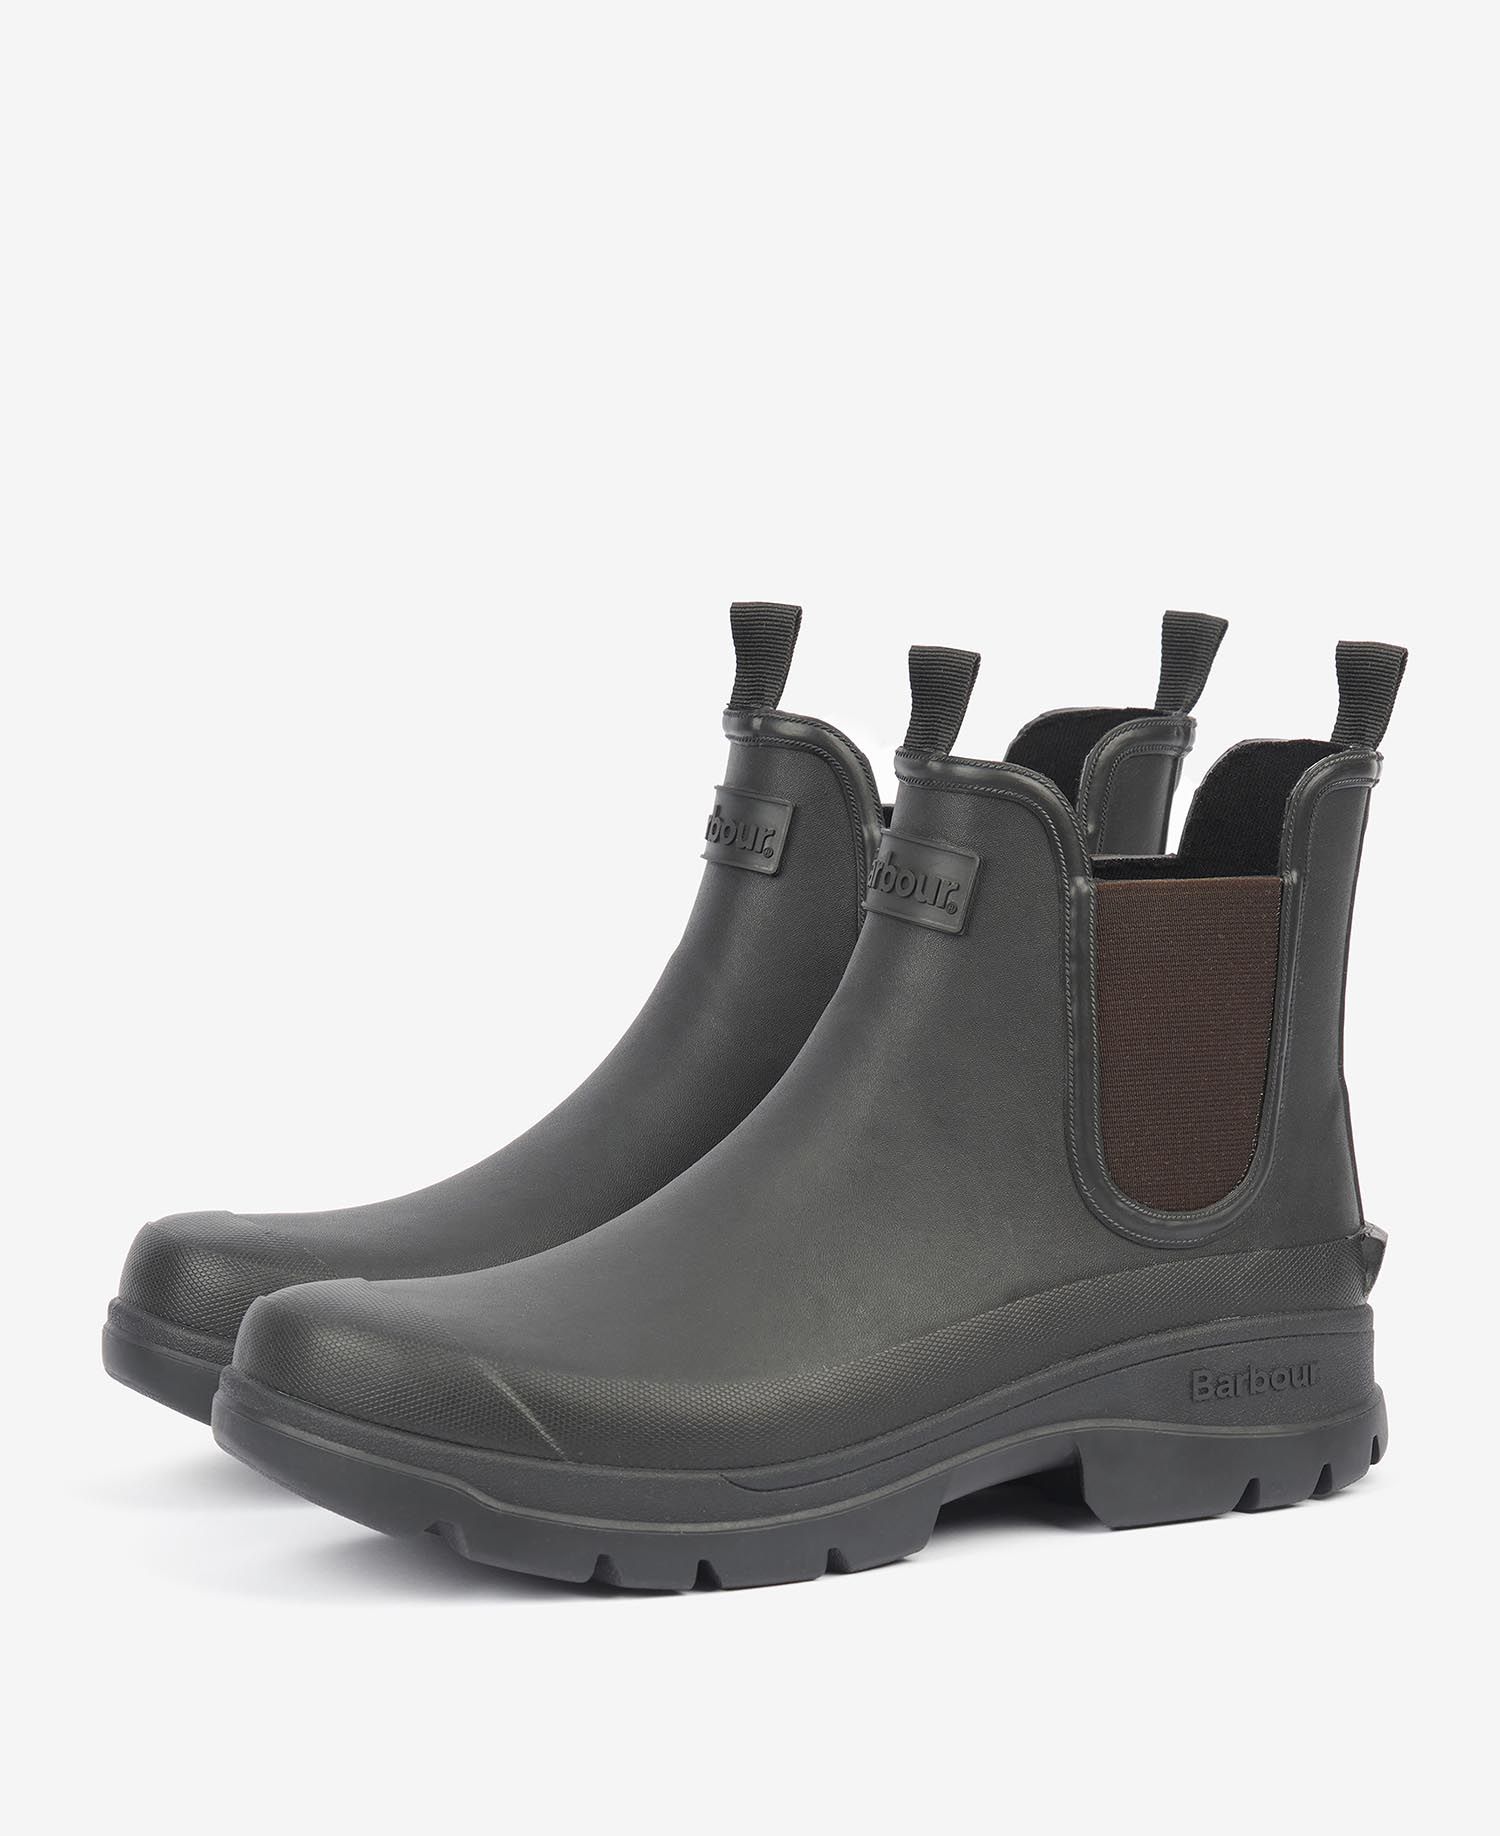 Barbour Nimbus Wellingtons - Gillanders.ie Town & Country Clothing